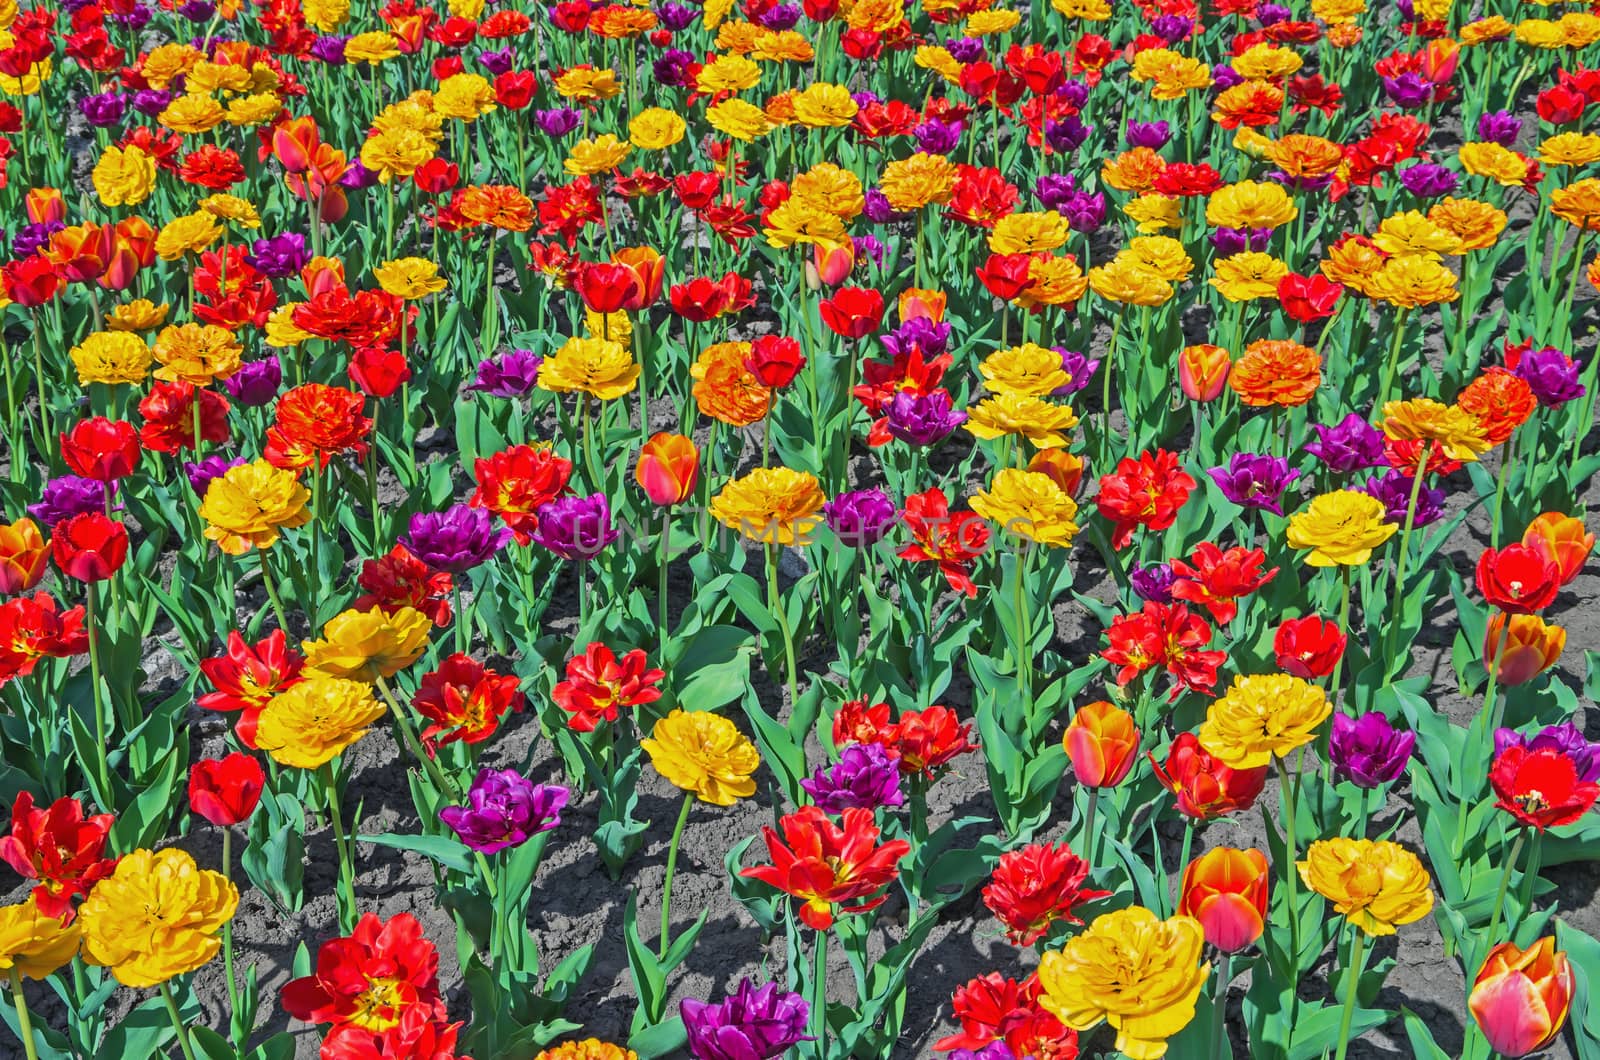 Colorful tulips planted flower bed in the city park in the spring